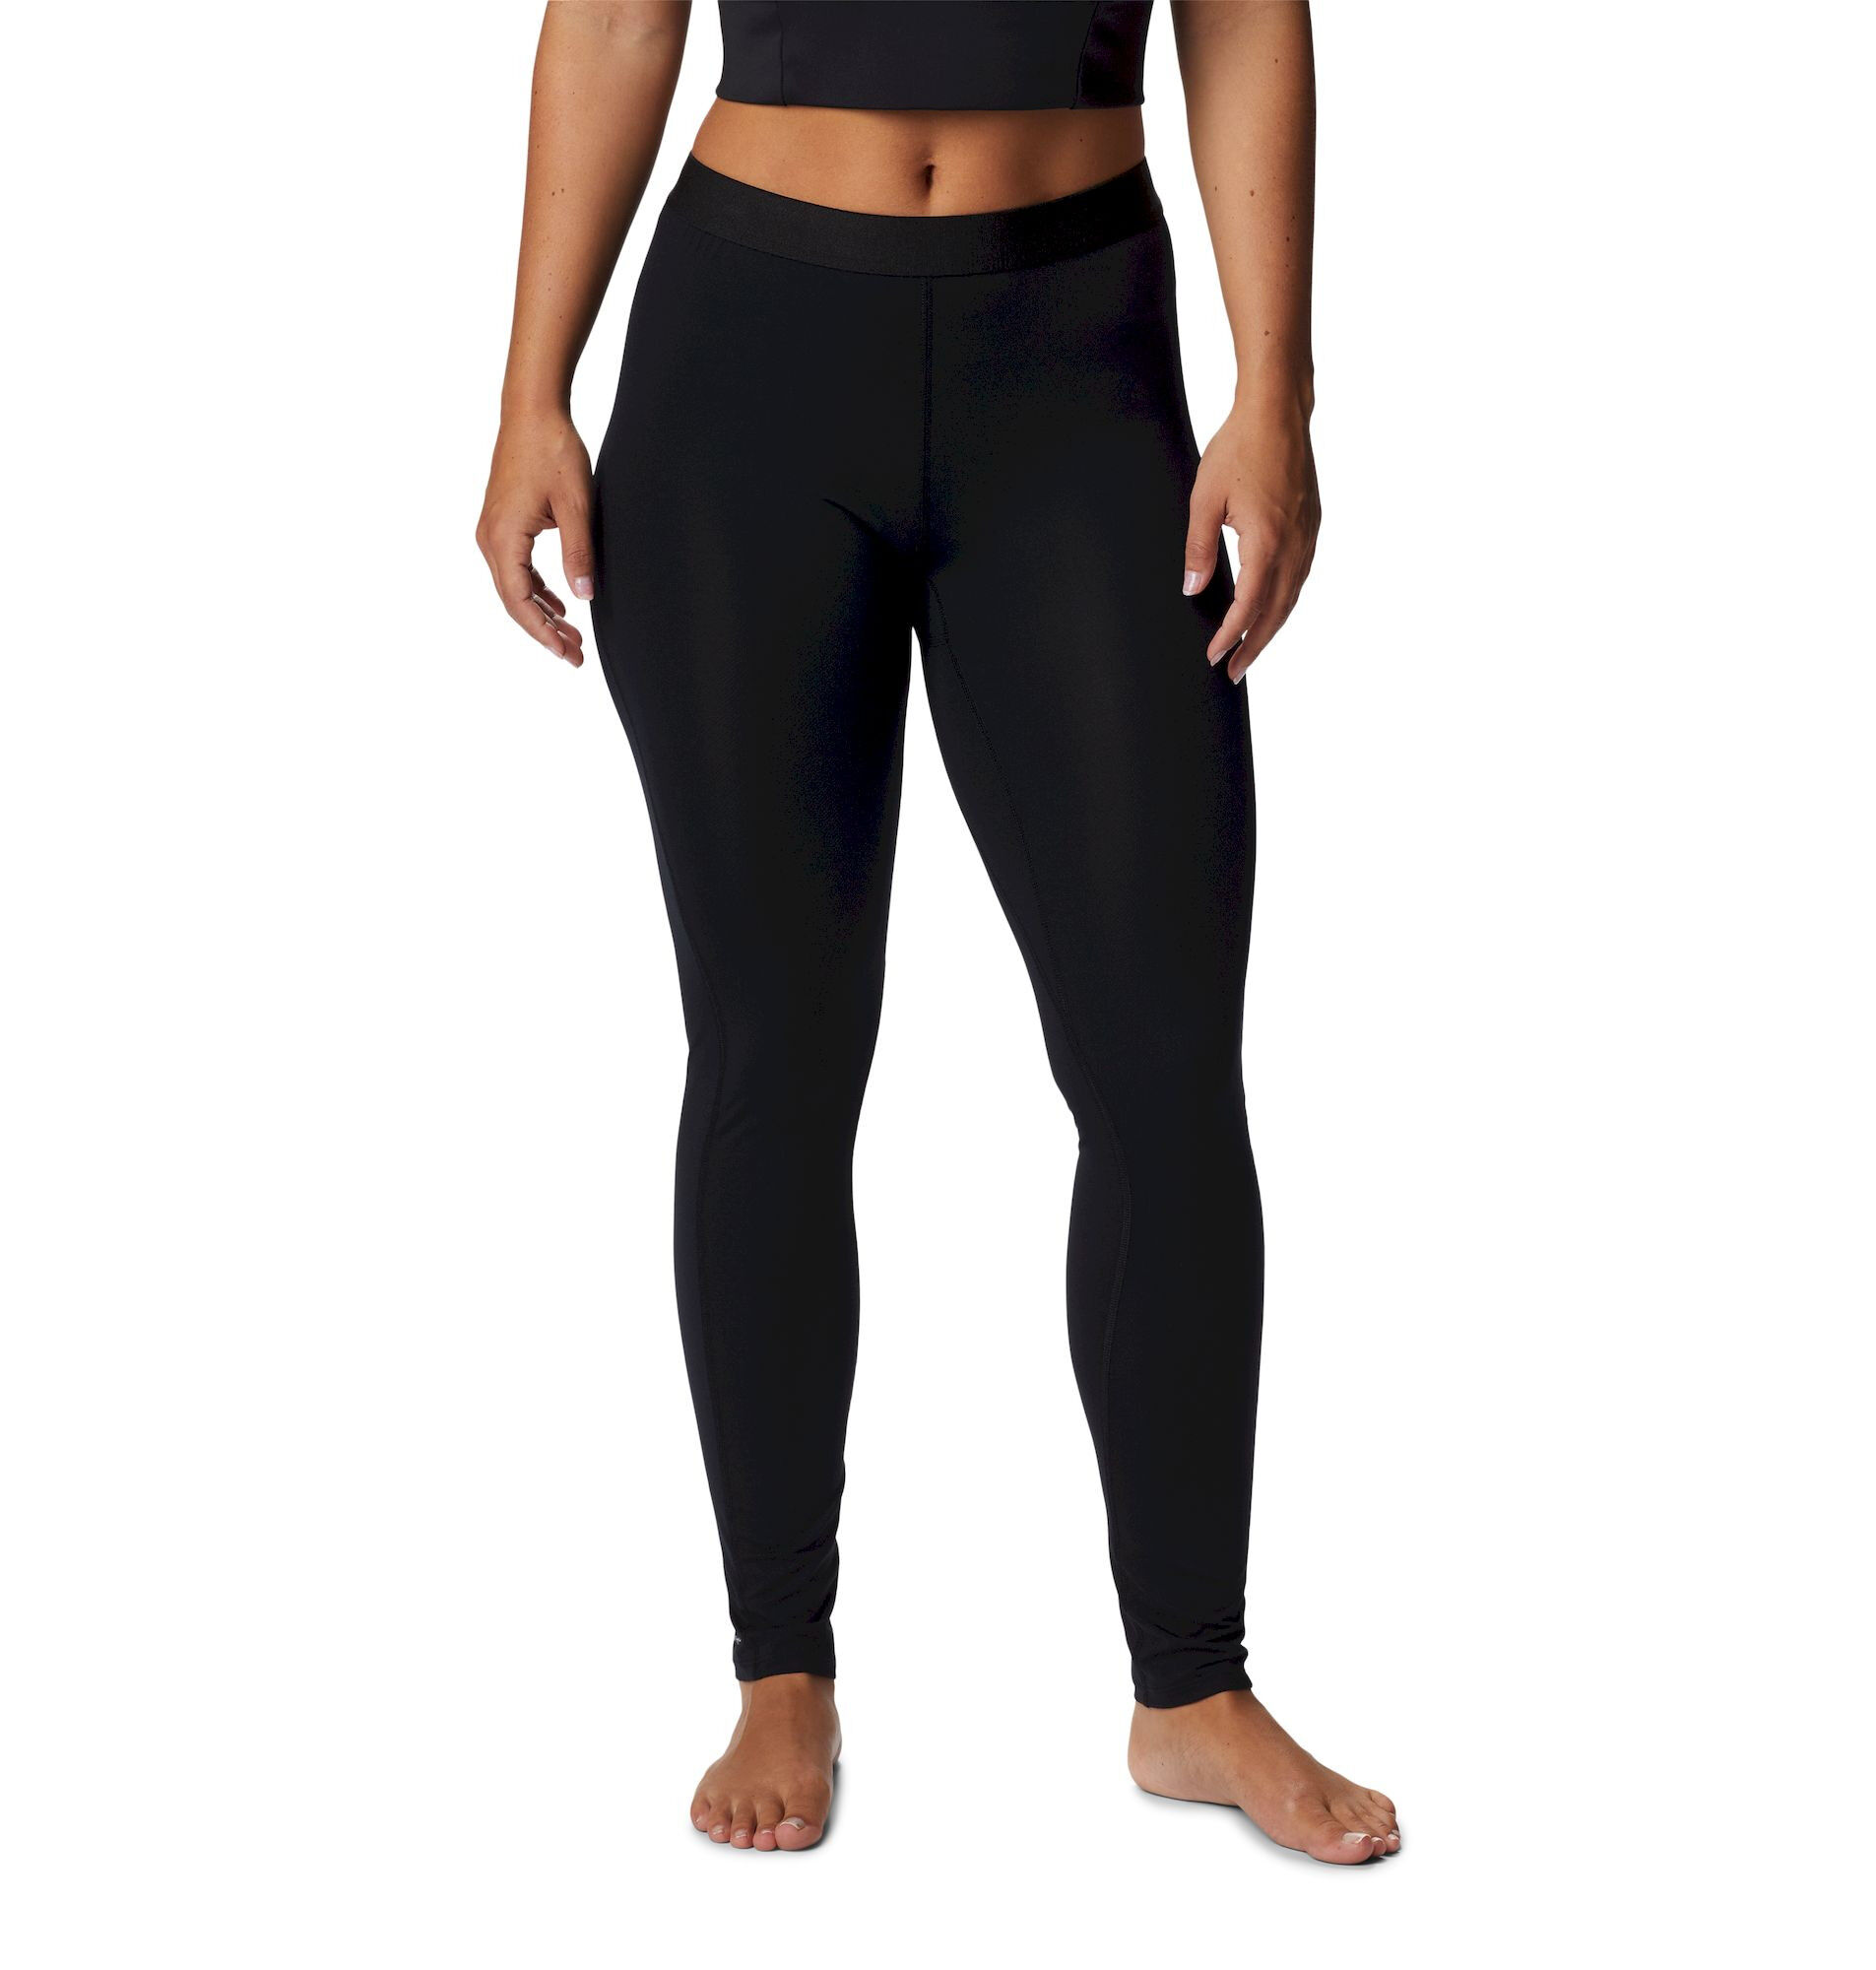 Columbia Midweight Stretch Tight - Collant thermique femme | Hardloop